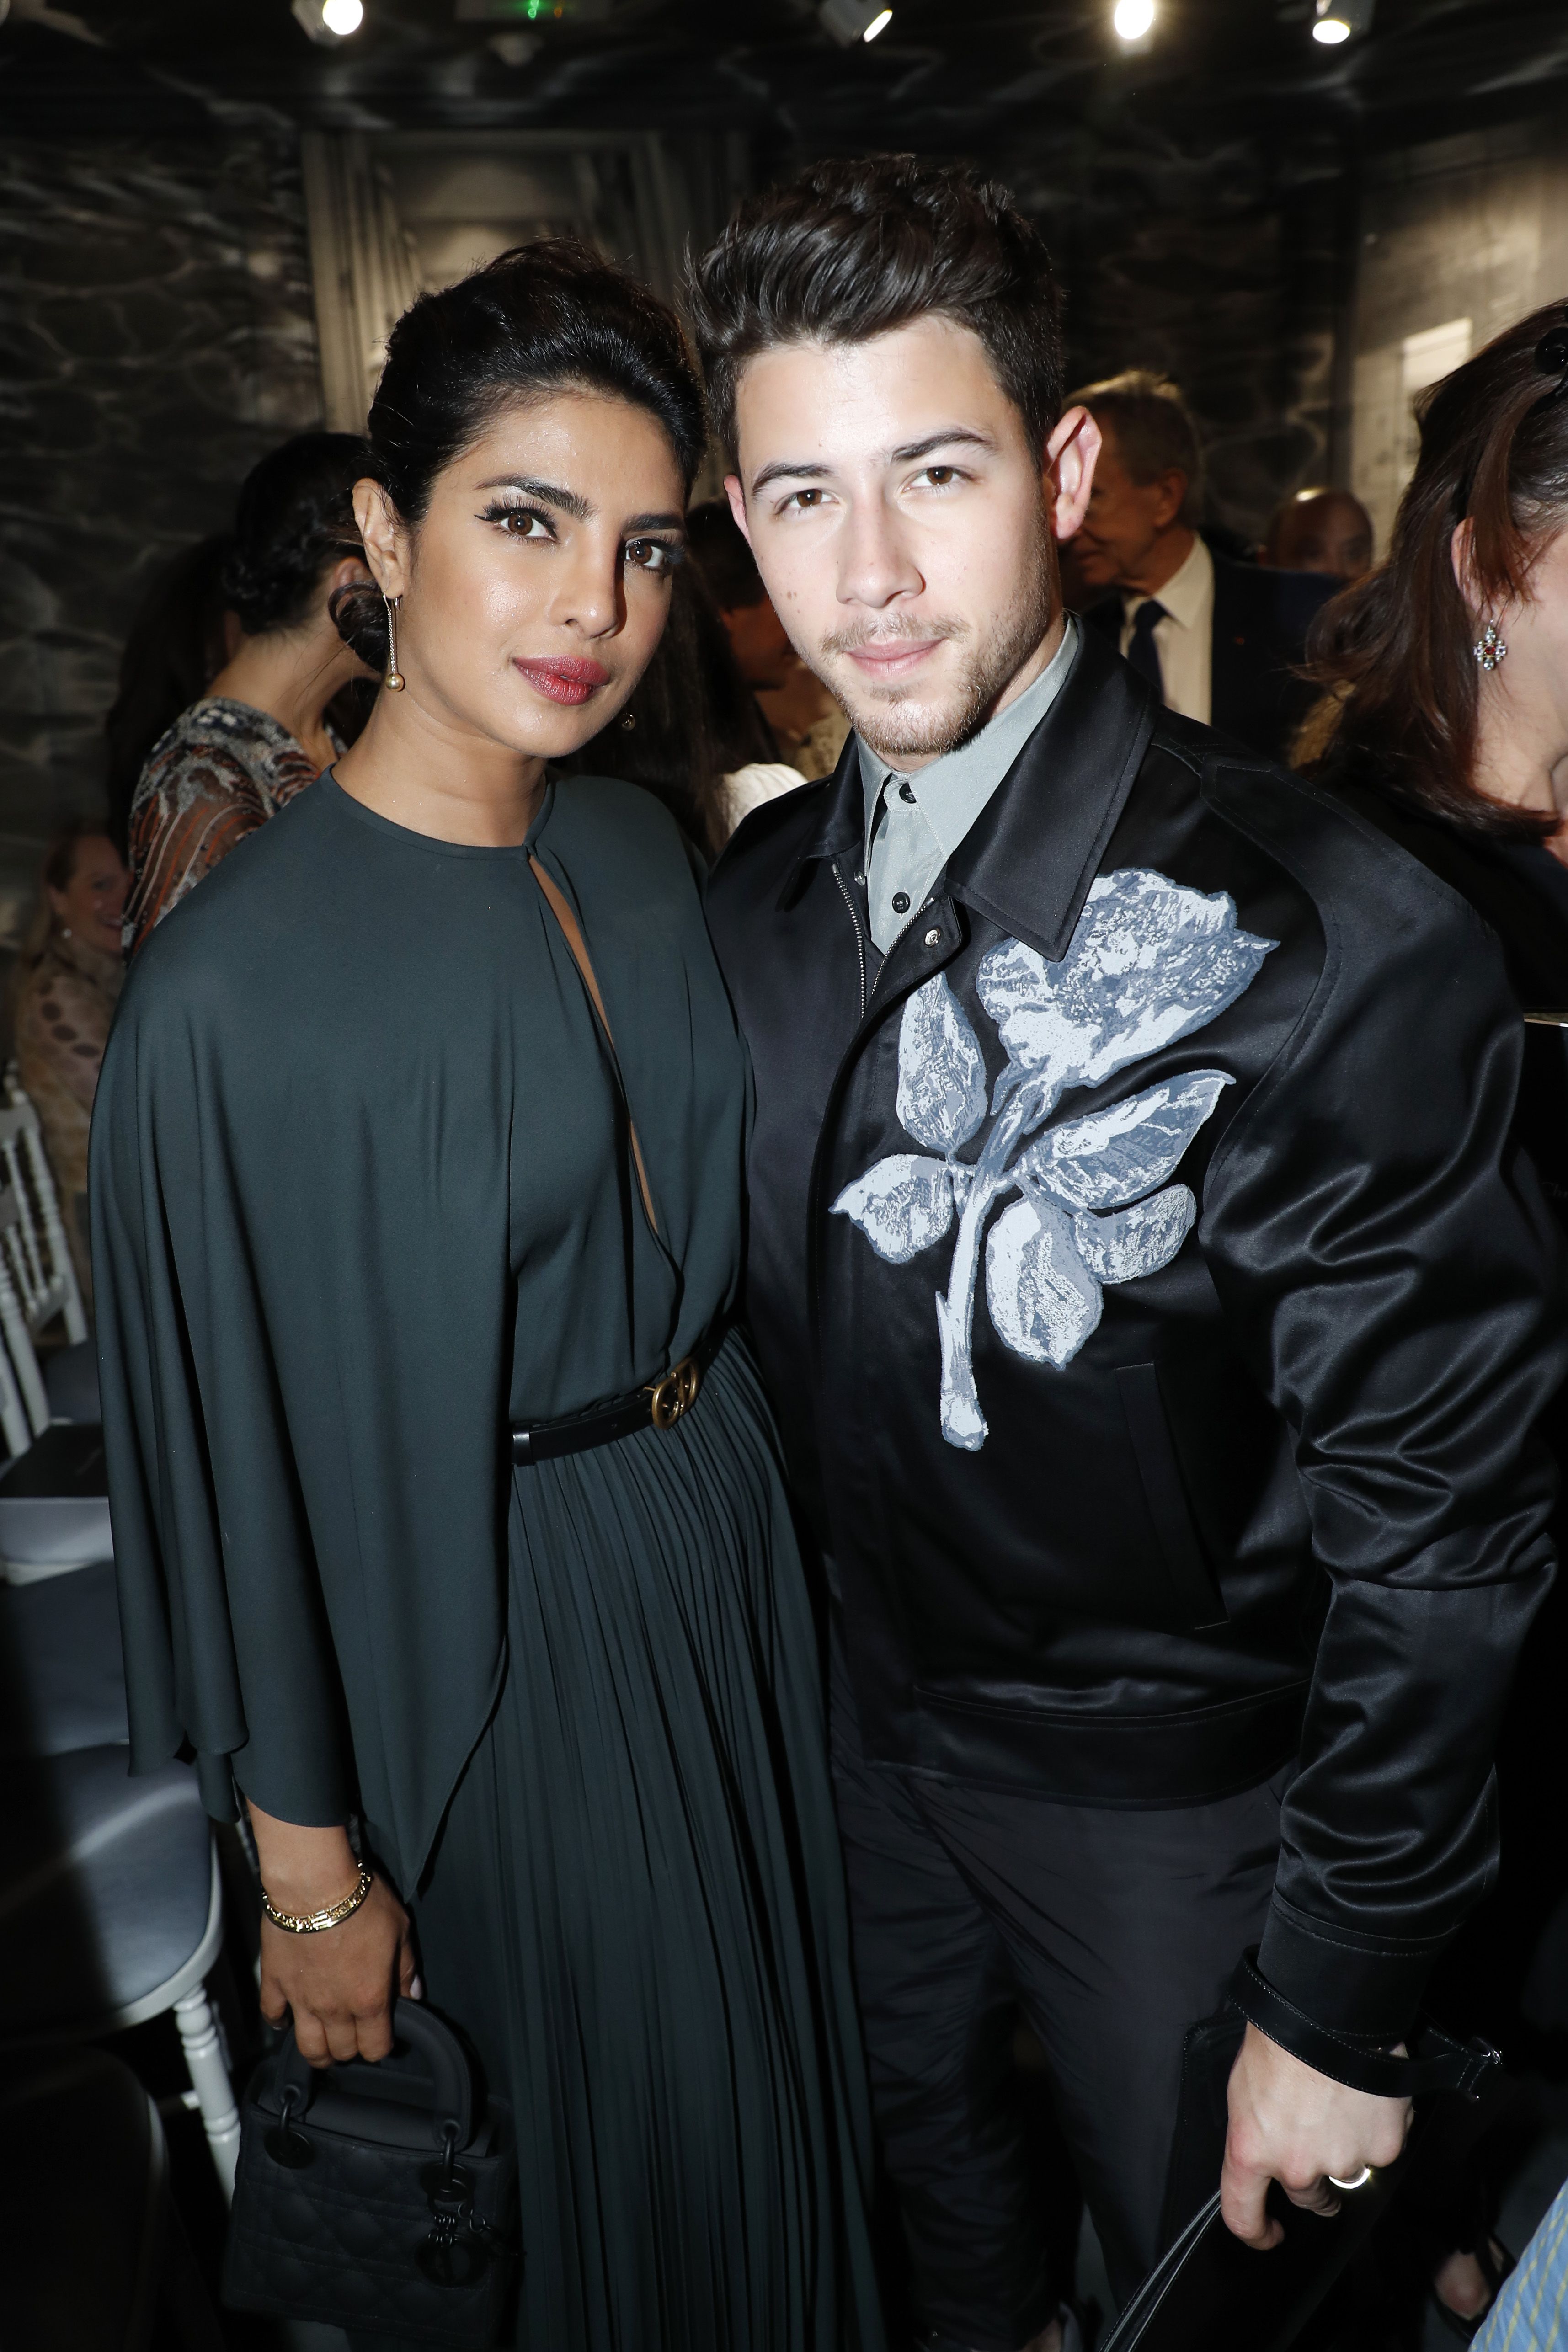 Nick Jonas Opens Up About His Hope to Have 'Many' Children With Priyanka Chopra